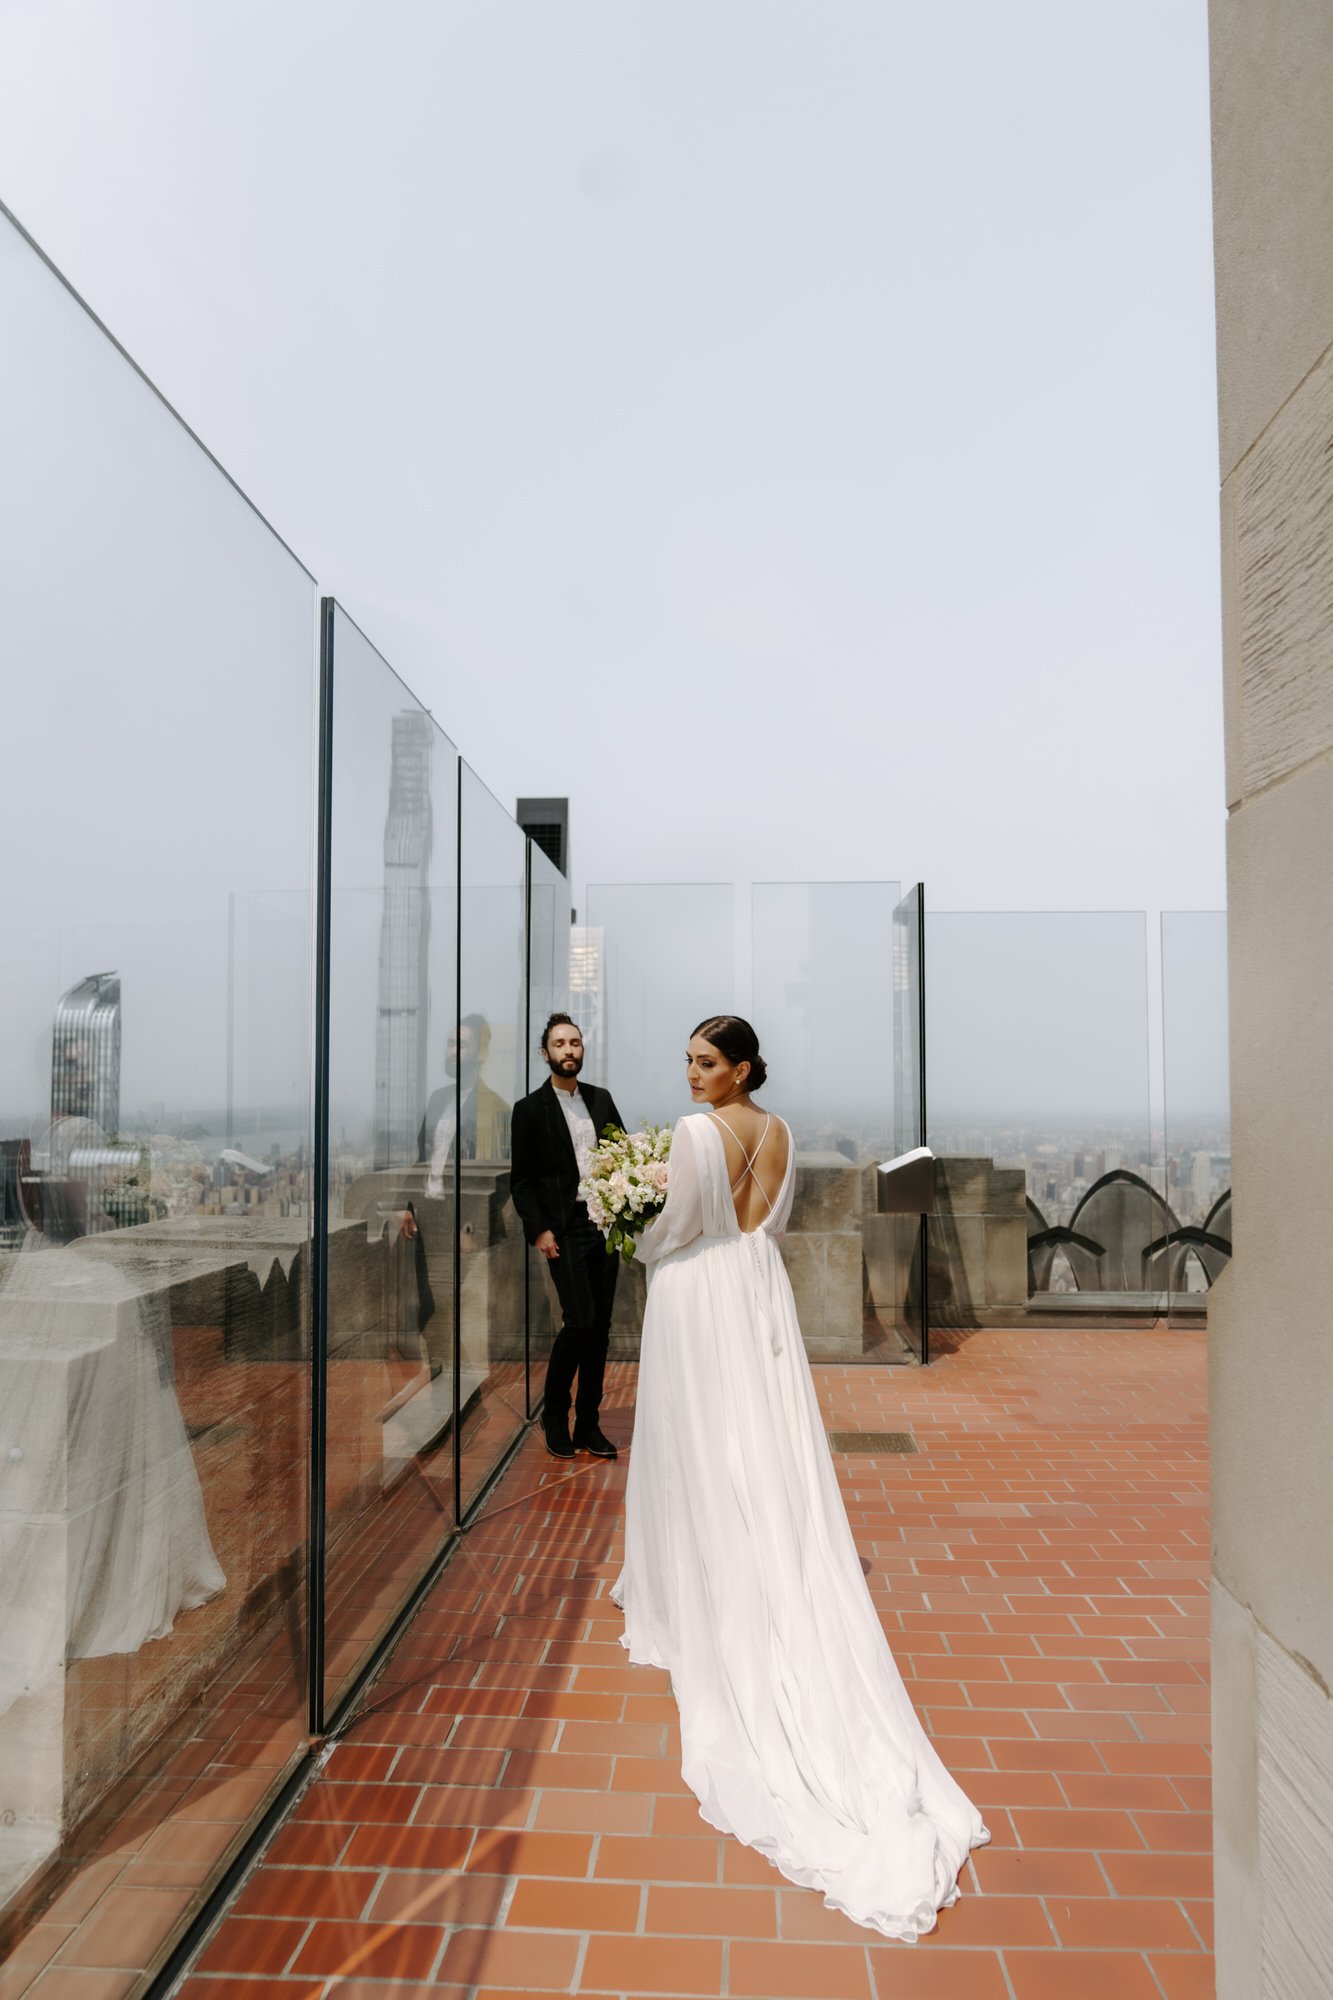 NYC-Top-of-The-Rock-Elopement-NYC-Photographer-Steph-Powell-Creative-27.jpg